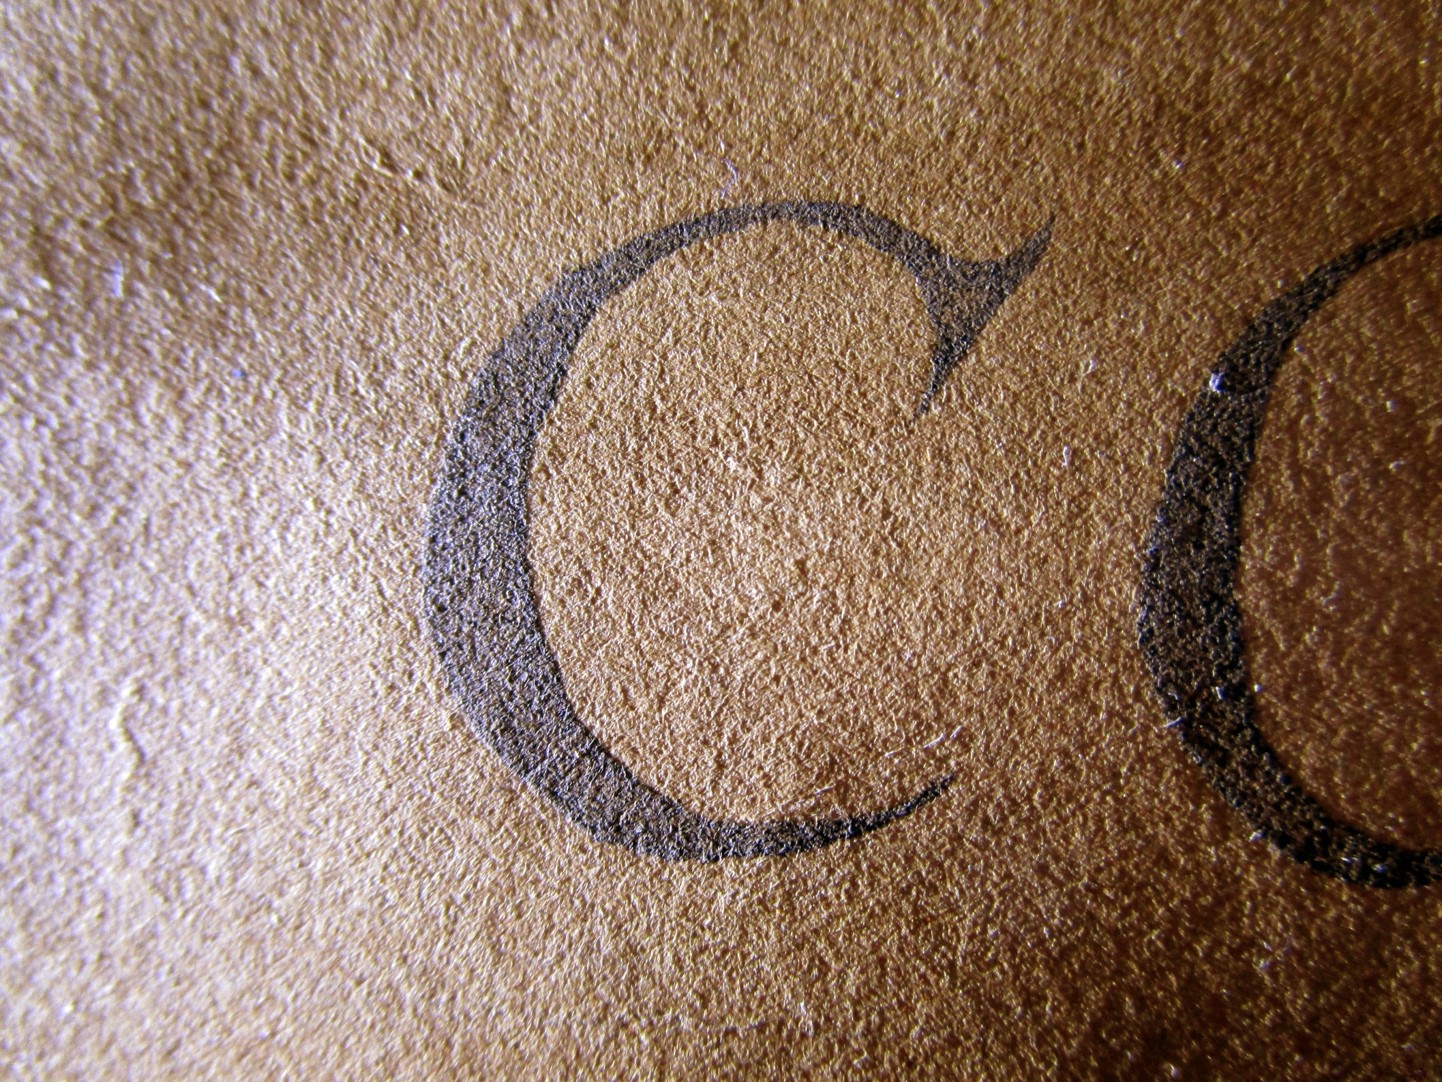 close up of "C" printed on paper